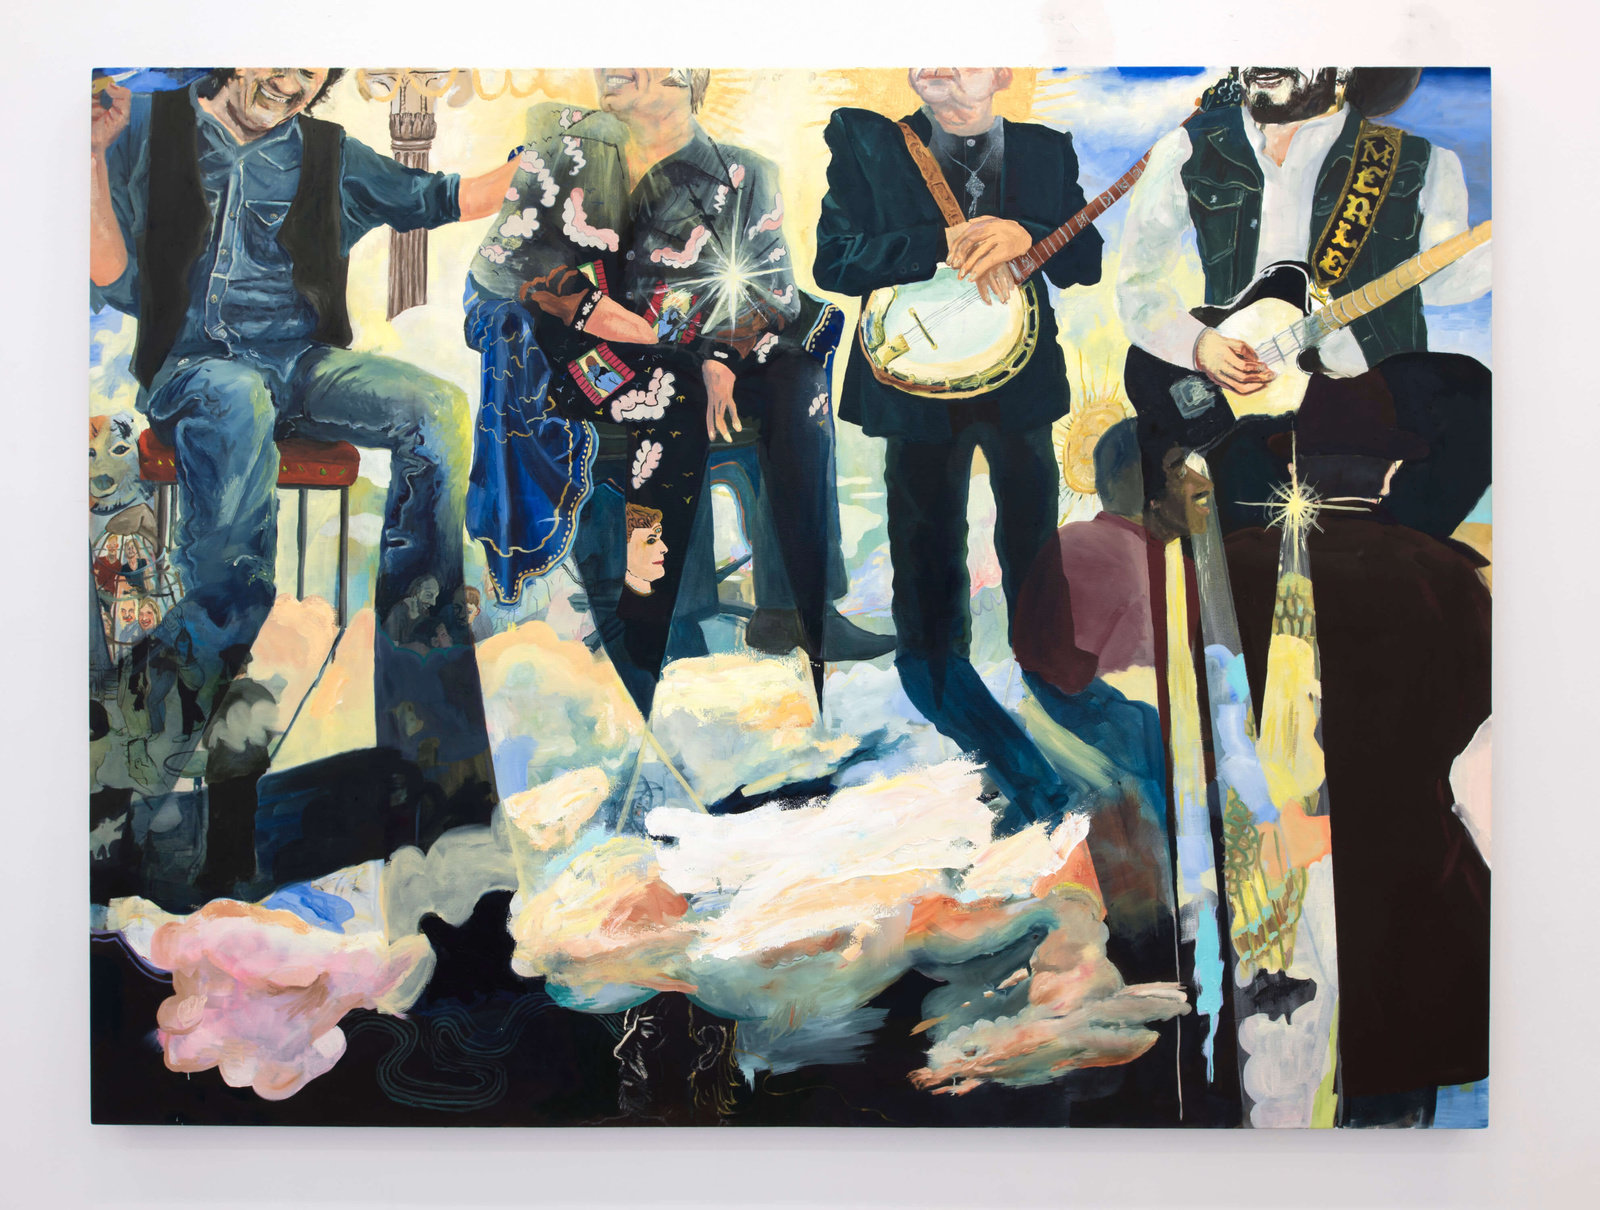 George jones greeting the newest members of heavens band by celeste dupuy spencer marlborough contemporary new york